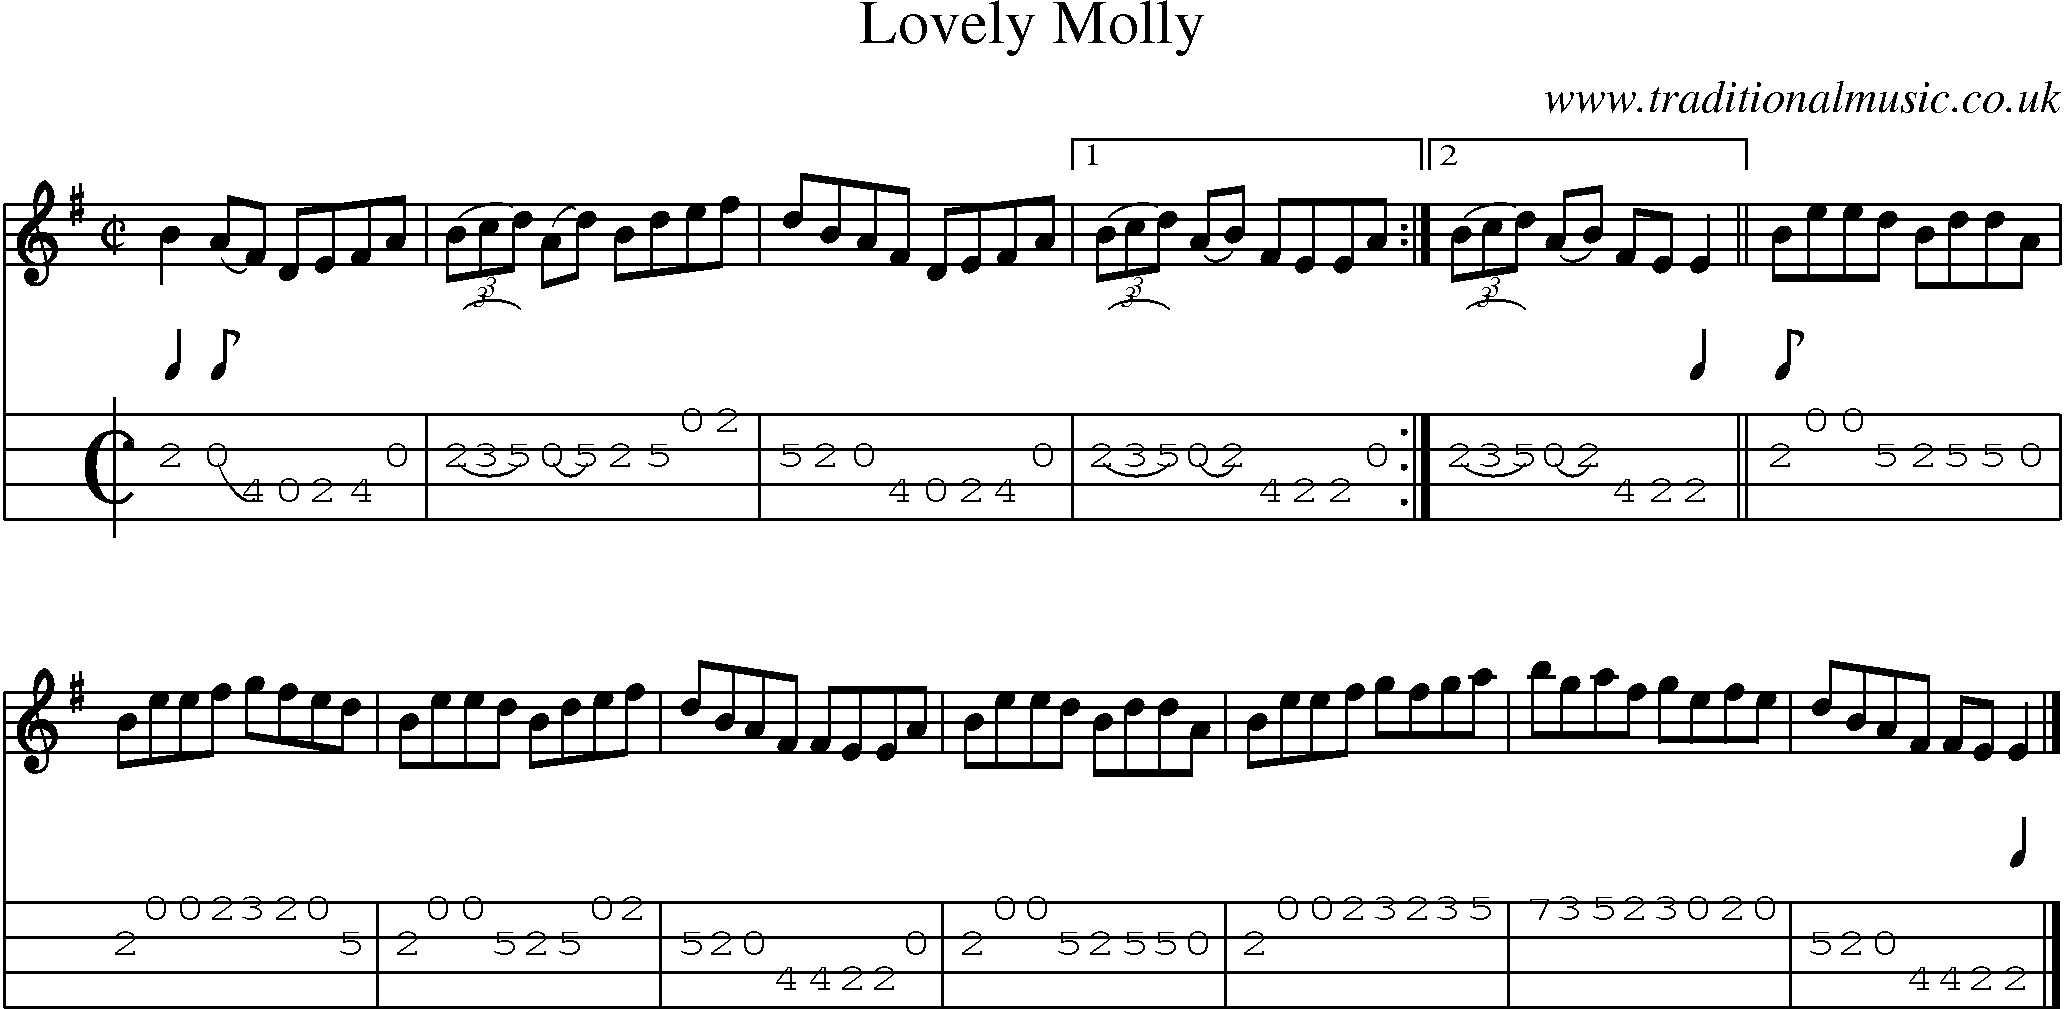 Music Score and Mandolin Tabs for Lovely Molly